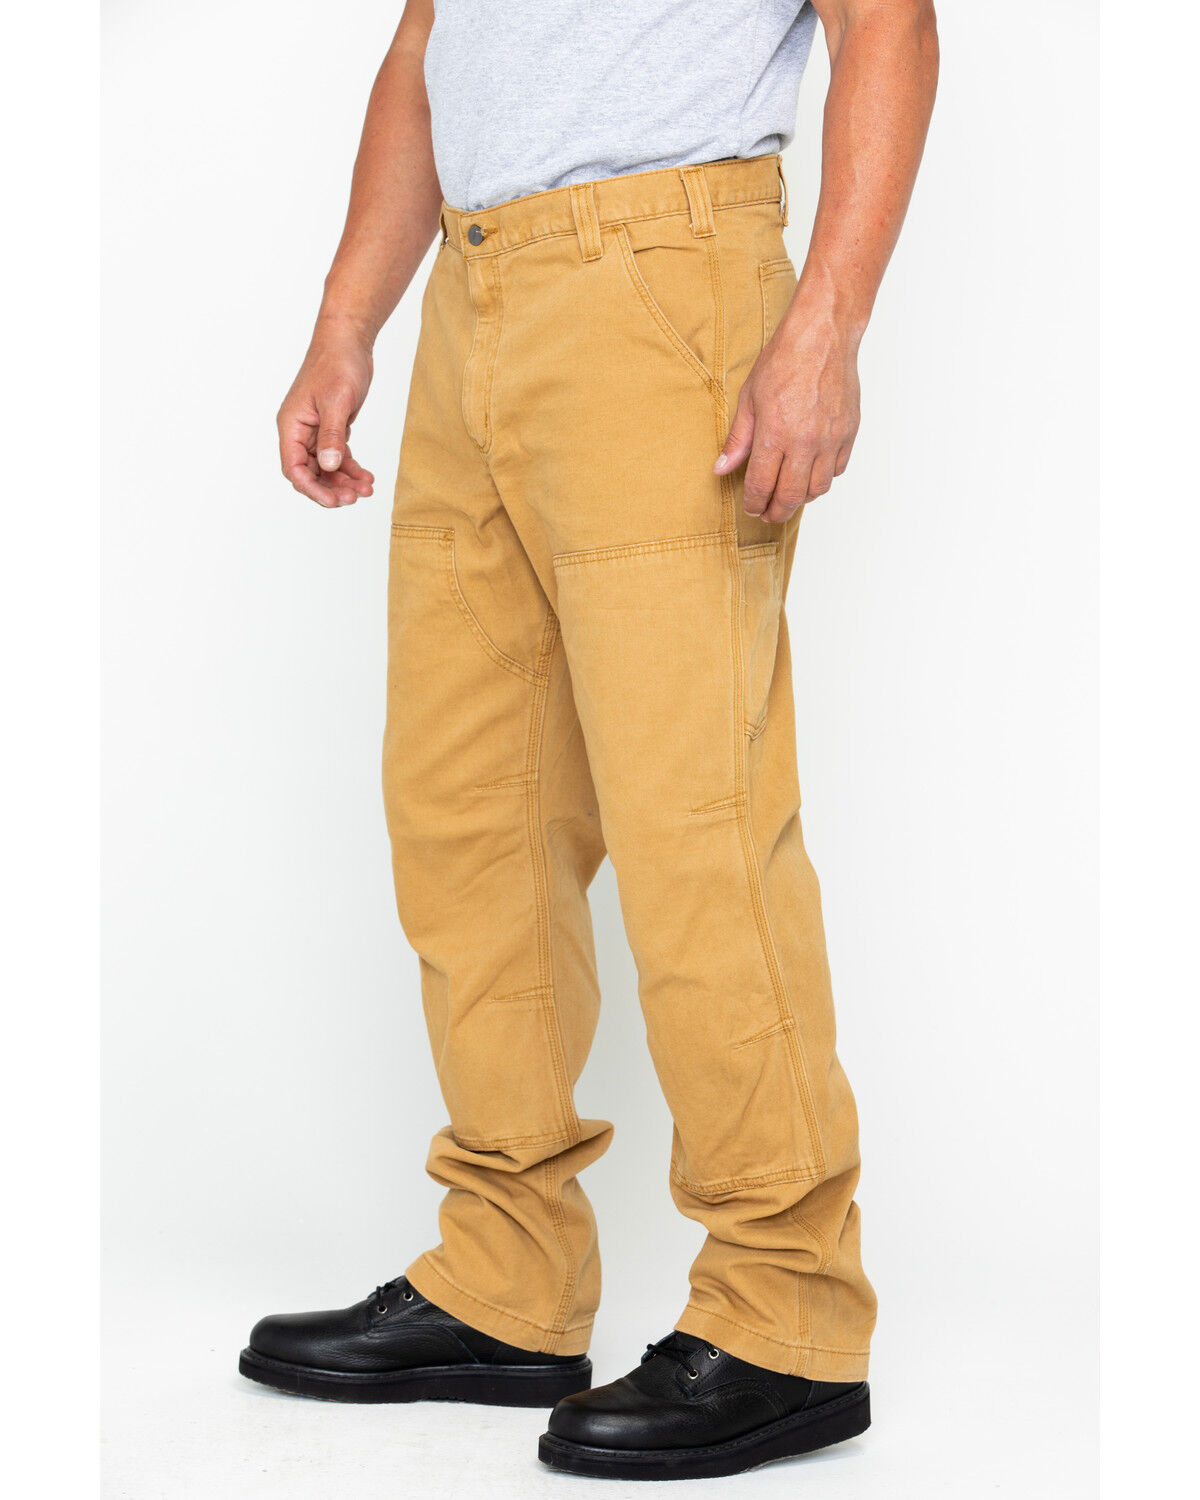 Carhartt Men's Rugged Flex Rigby Double Front Pant 